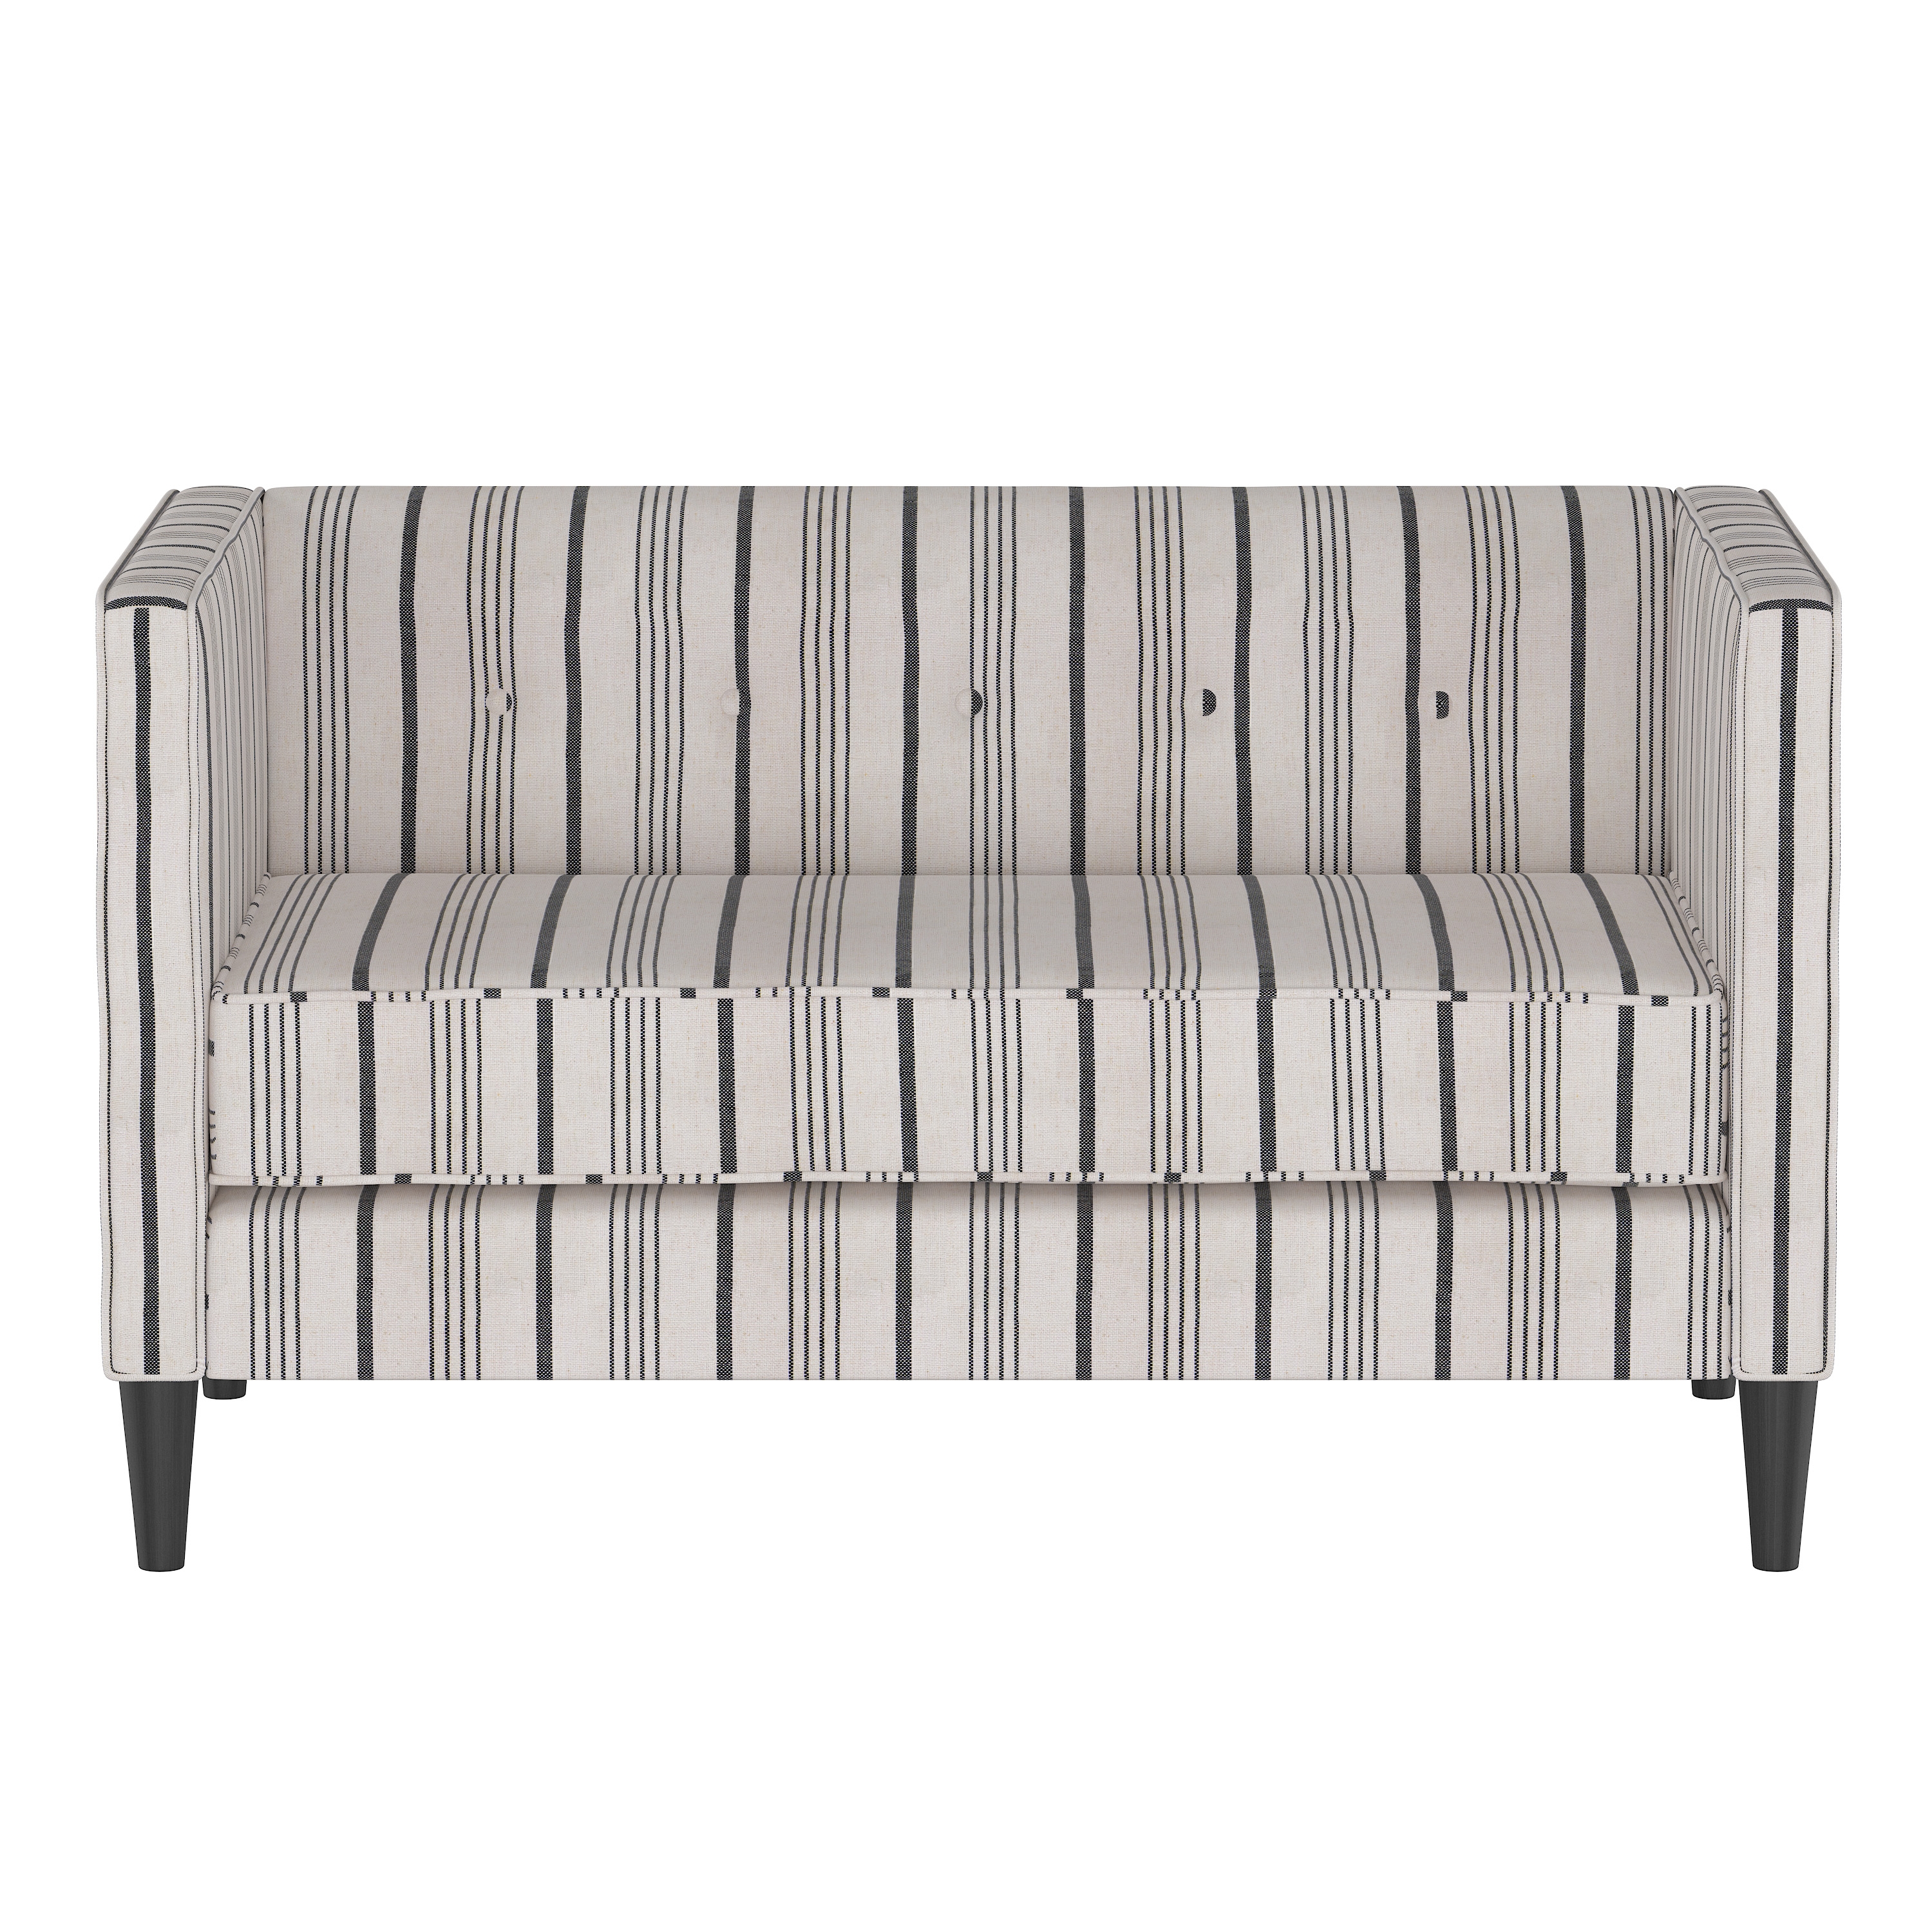 Downing Settee, Albion Stripe - DNU - Image 1